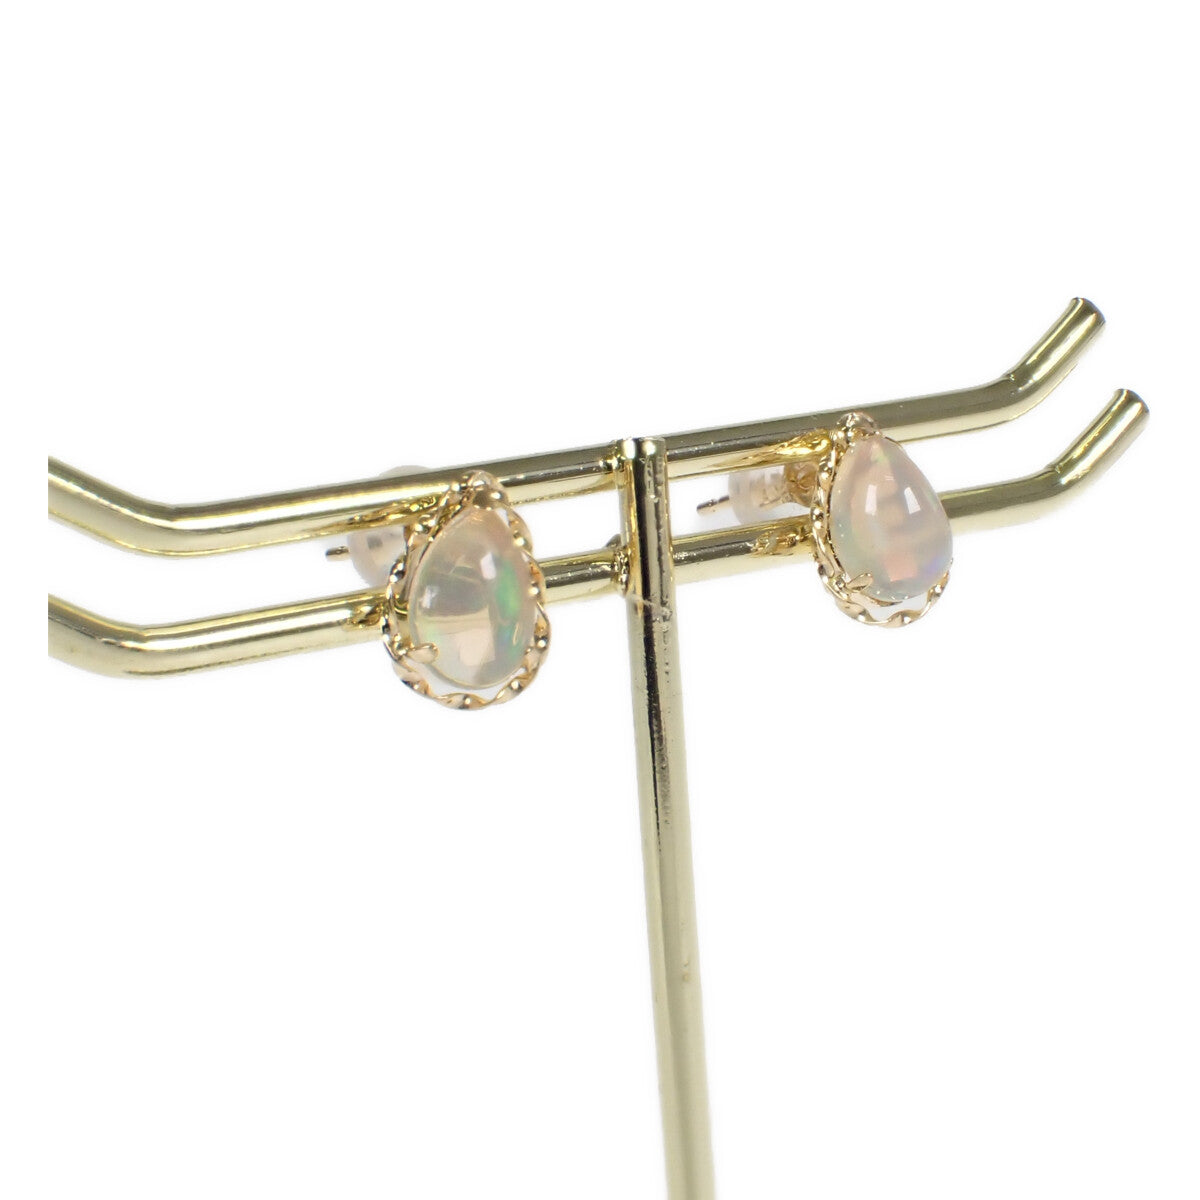 Women's 0.45ct Water Opal Design Earrings in K18 Yellow Gold, Gold, Never Used, Pre-owned